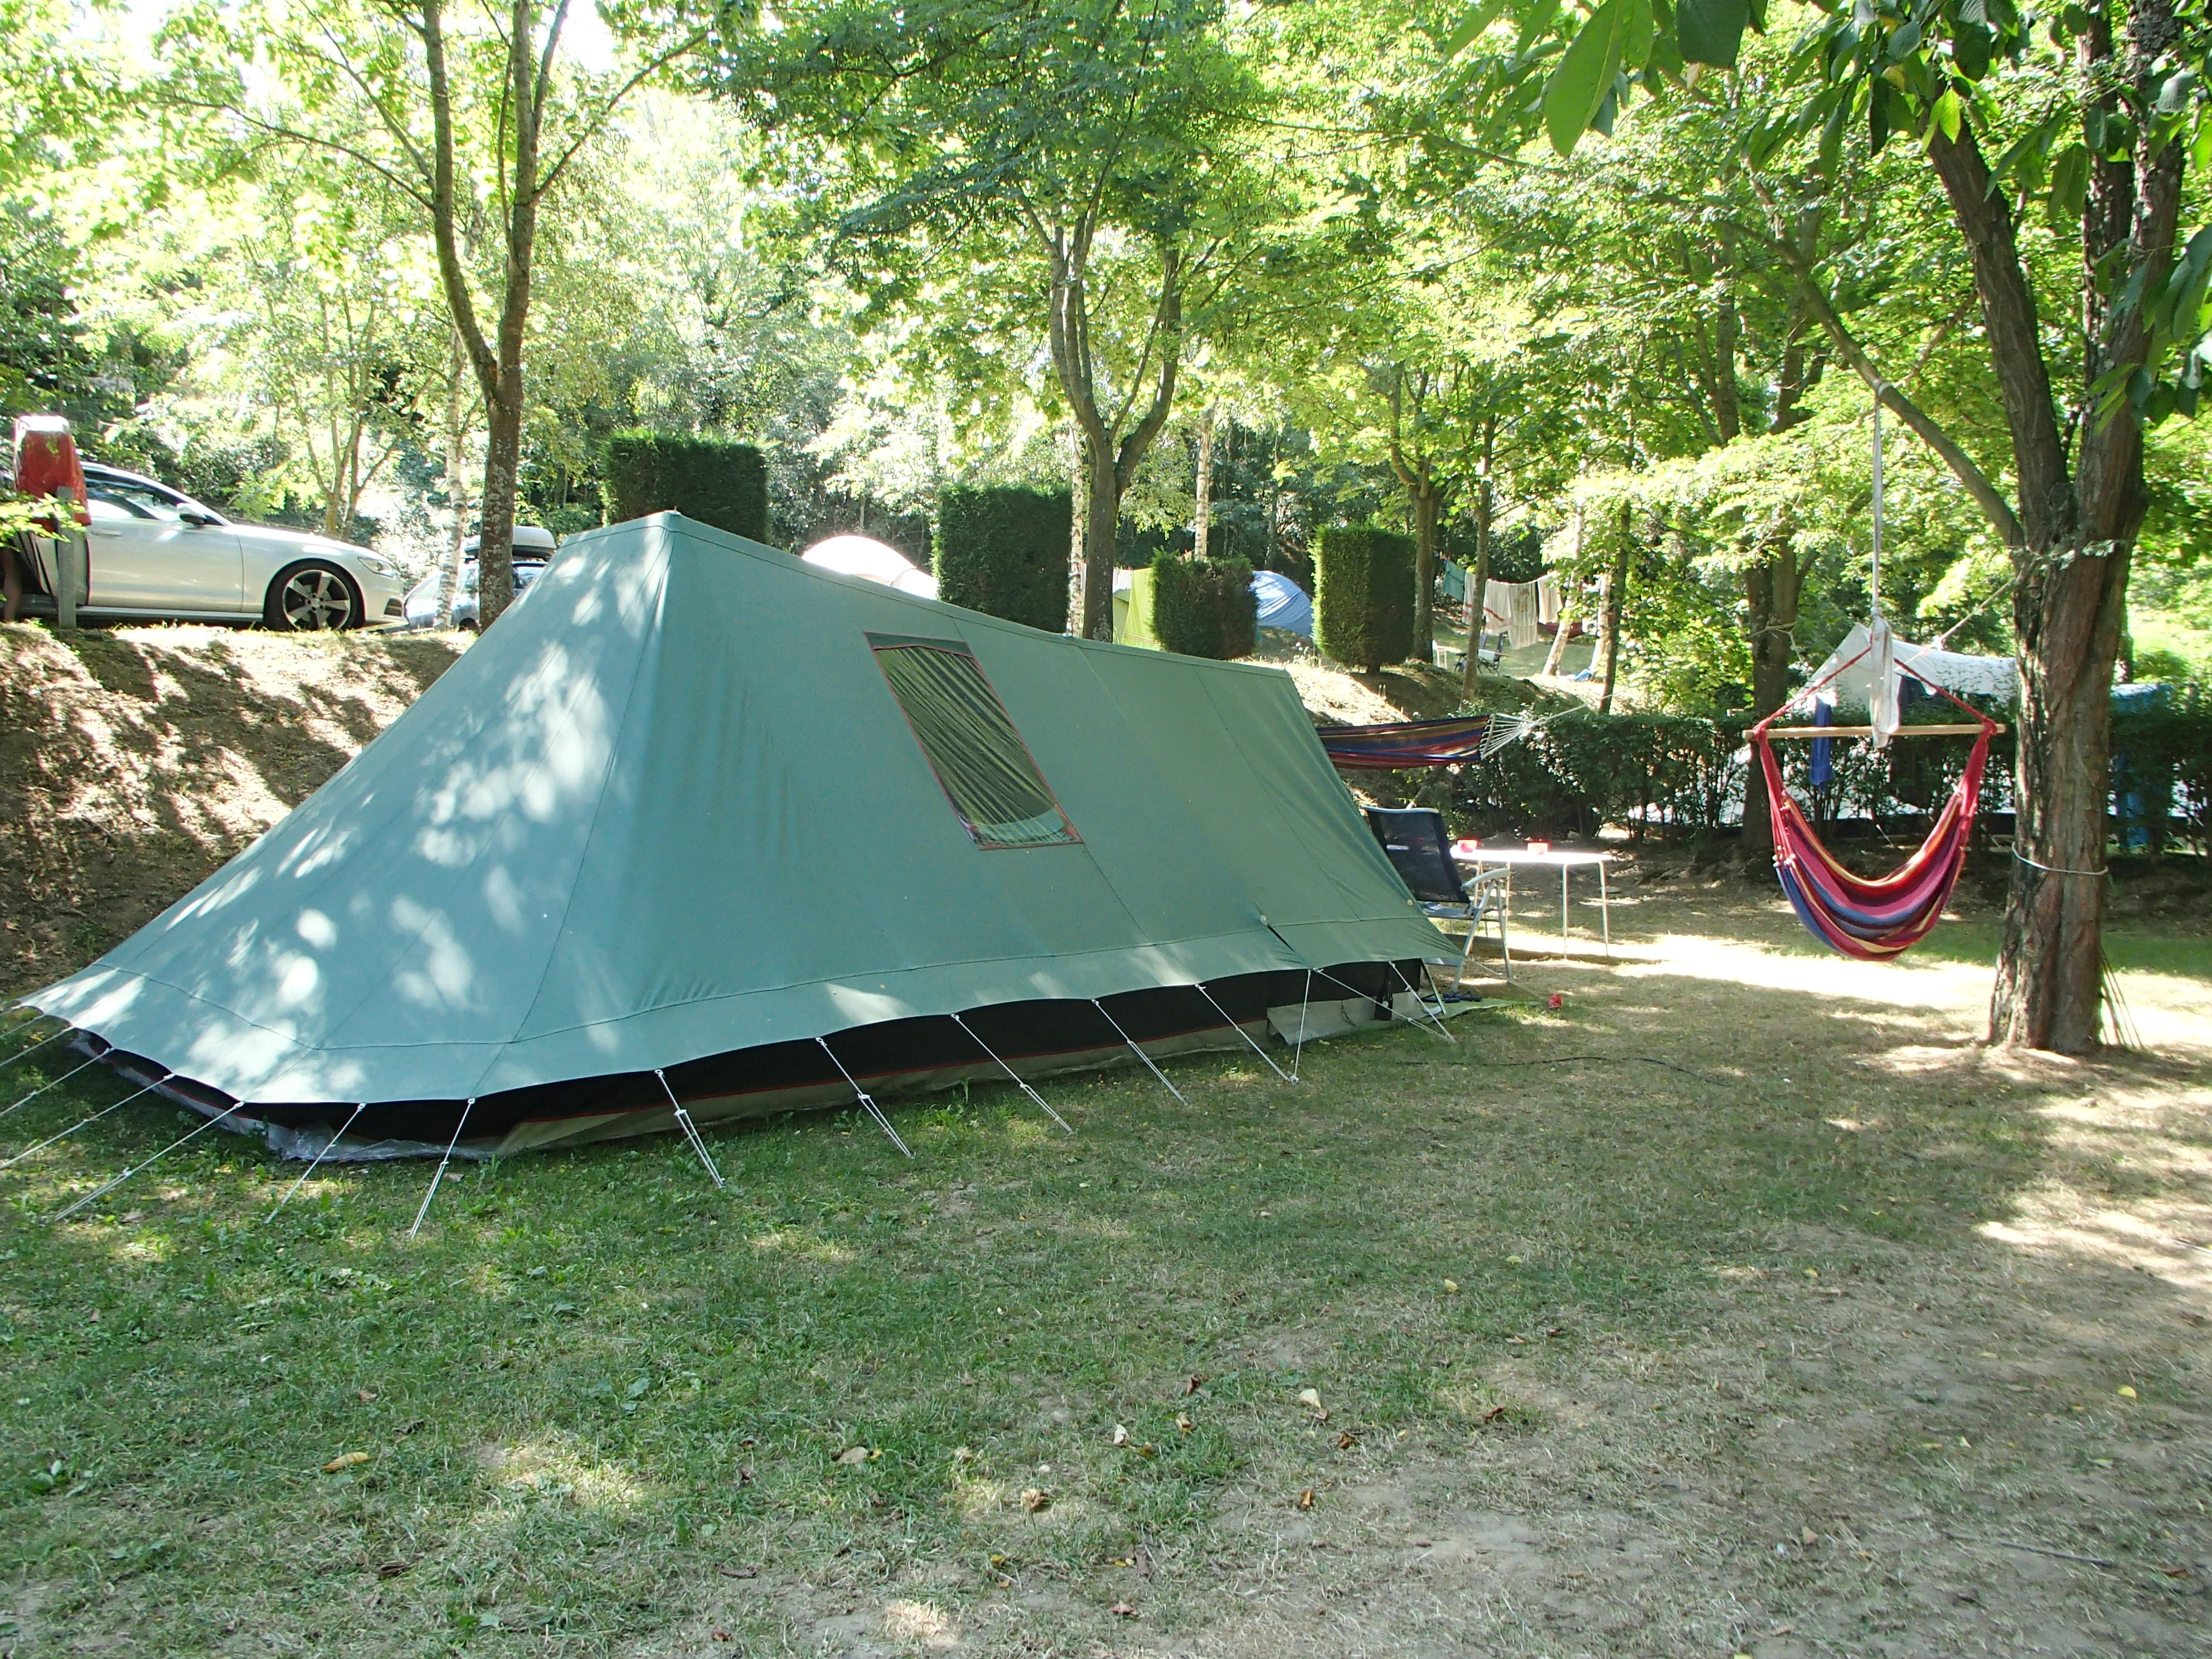 Pitch - Pitch Privilege Xxl (150-200M²) Near The Swimming Pool, Only For Tents - Sites et Paysages L'Oasis